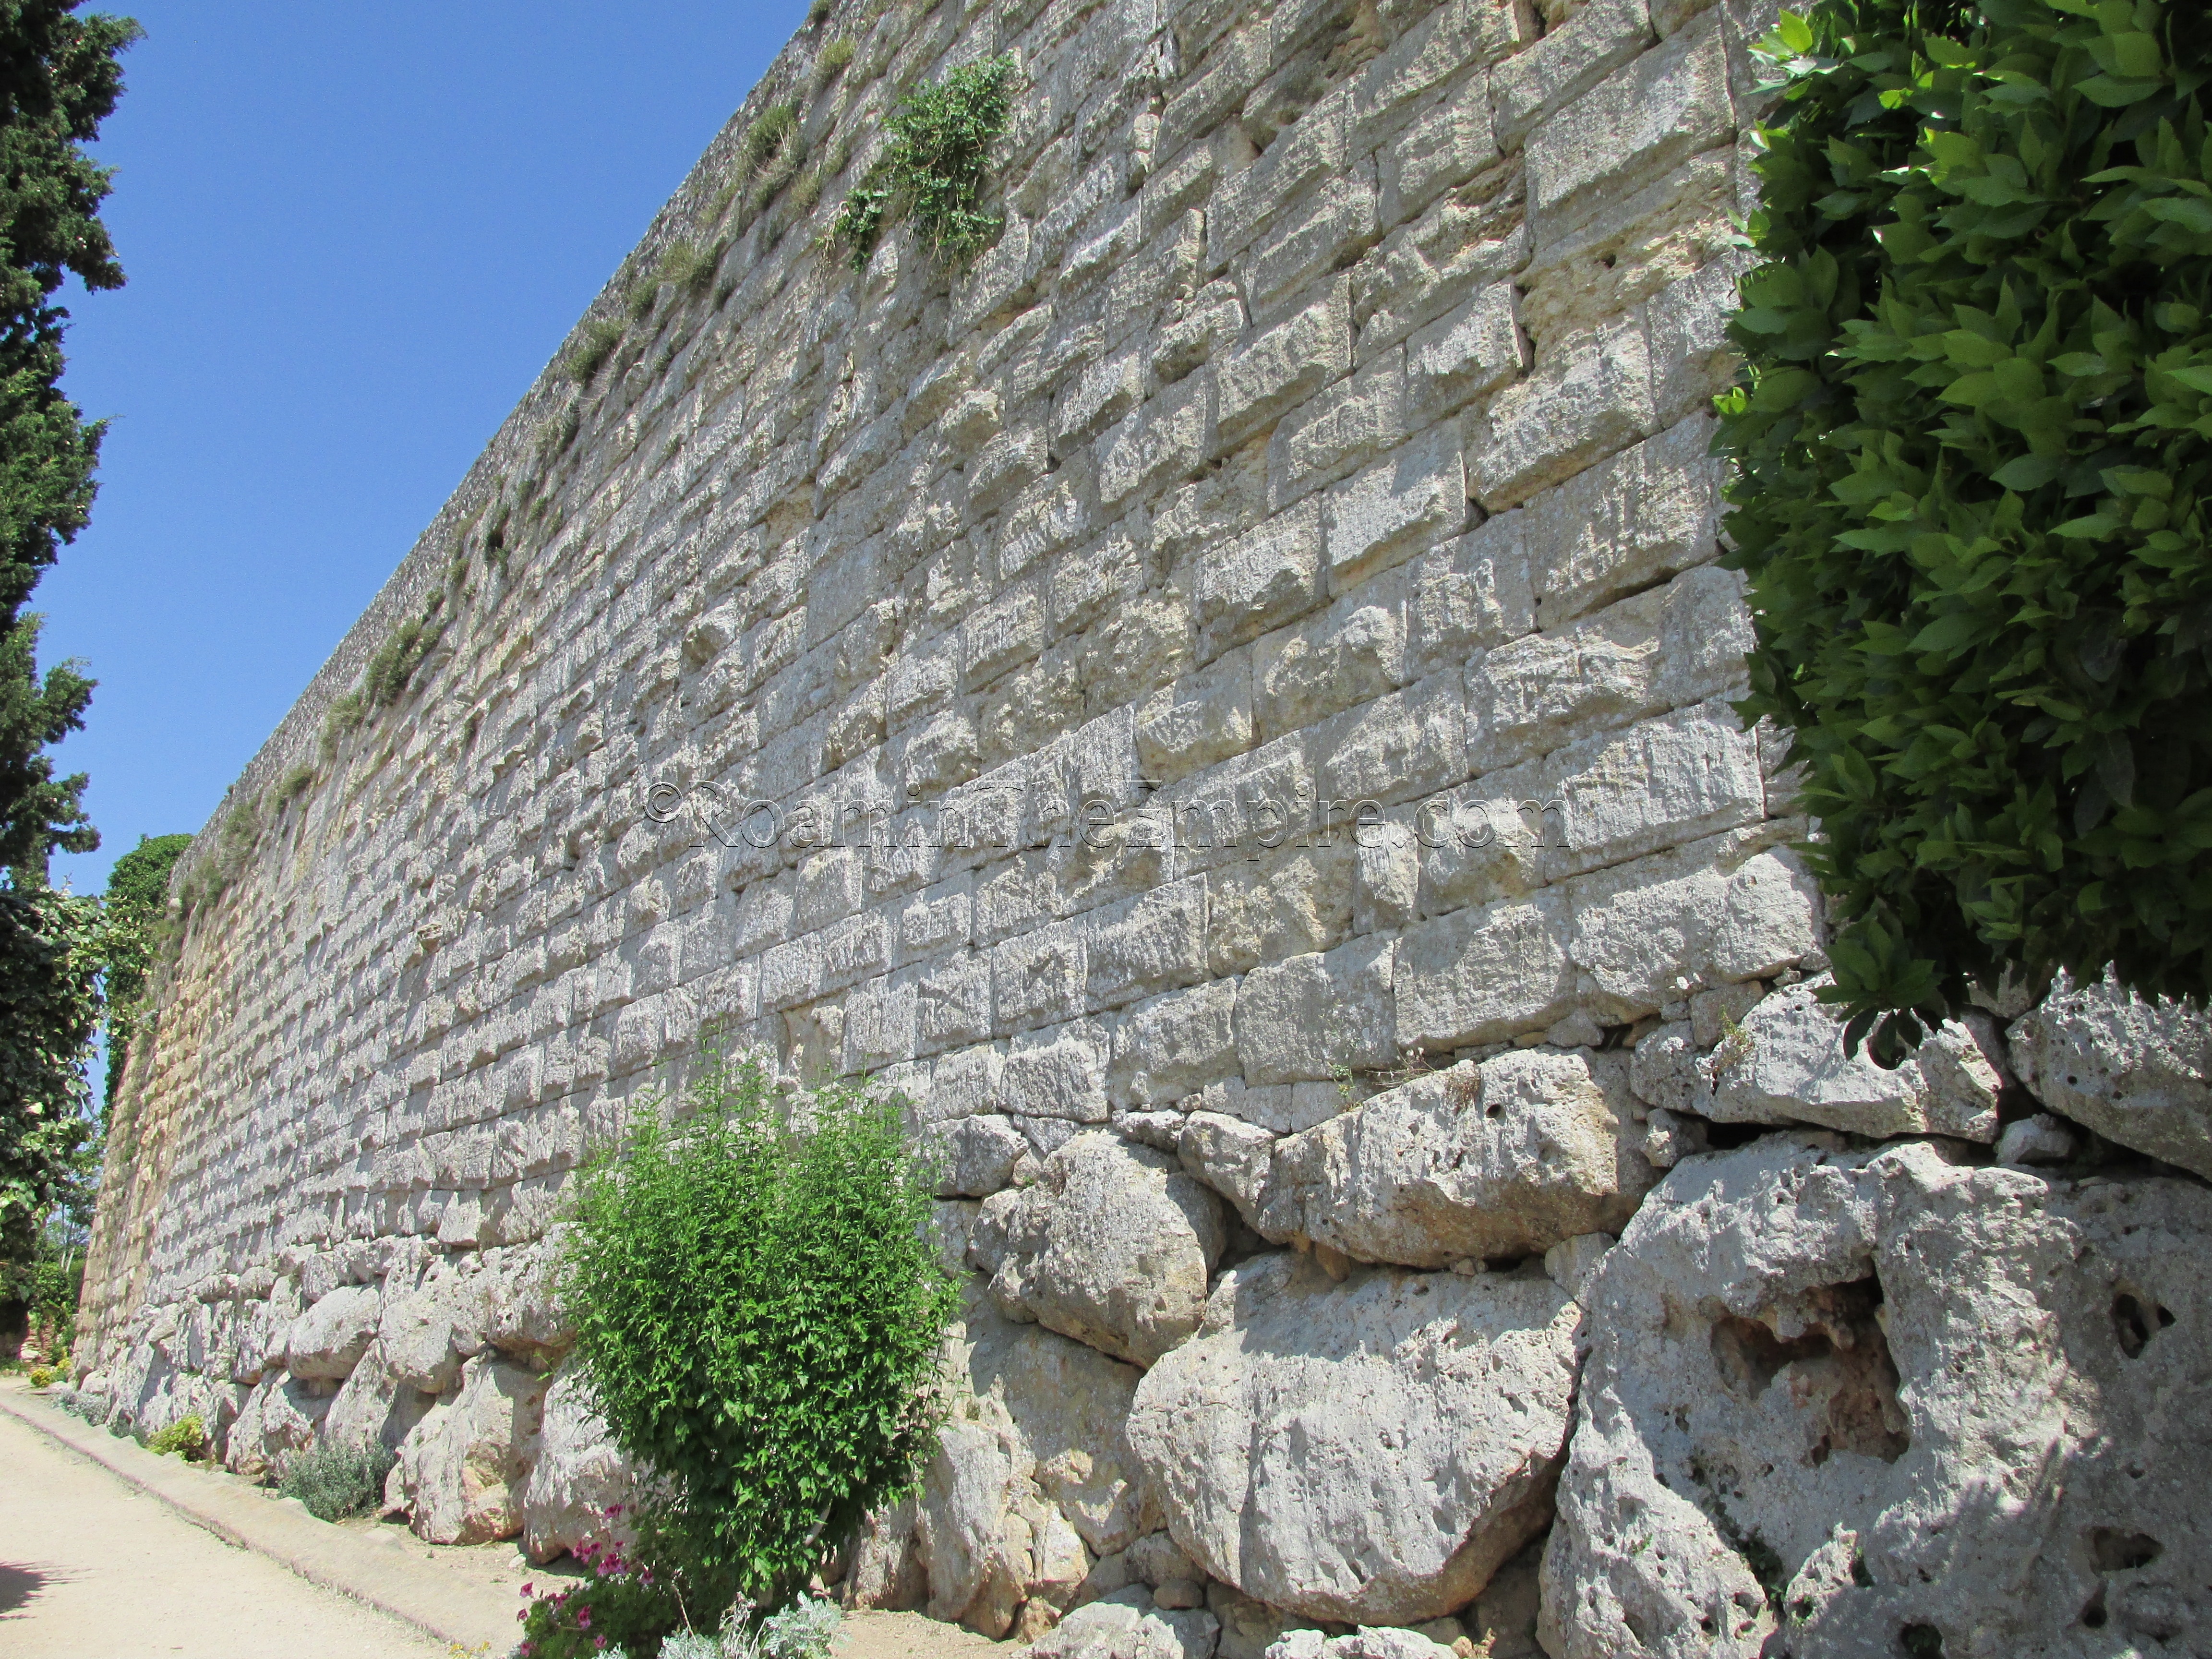 Section of the walls with first and second phase of Roman building. Tarraco.